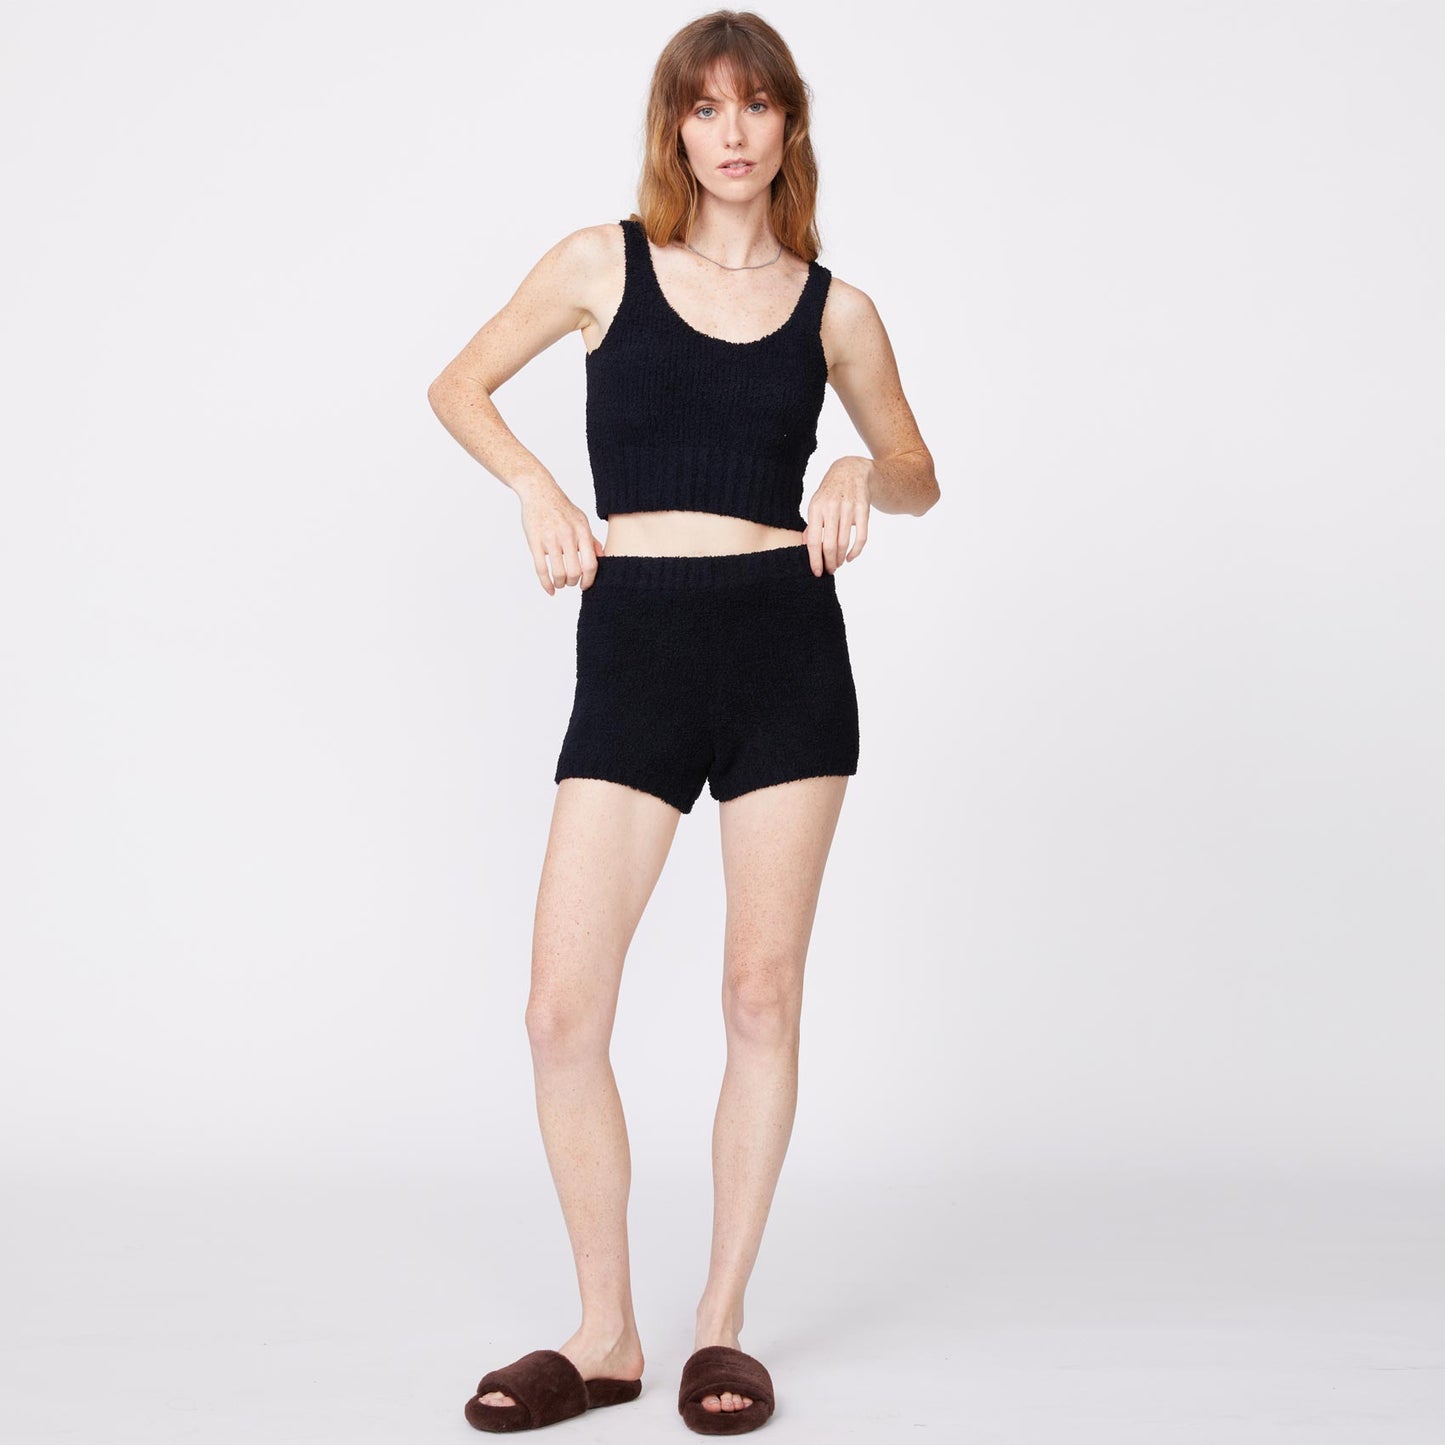 Front view of model wearing the plush sweater shorts in black.